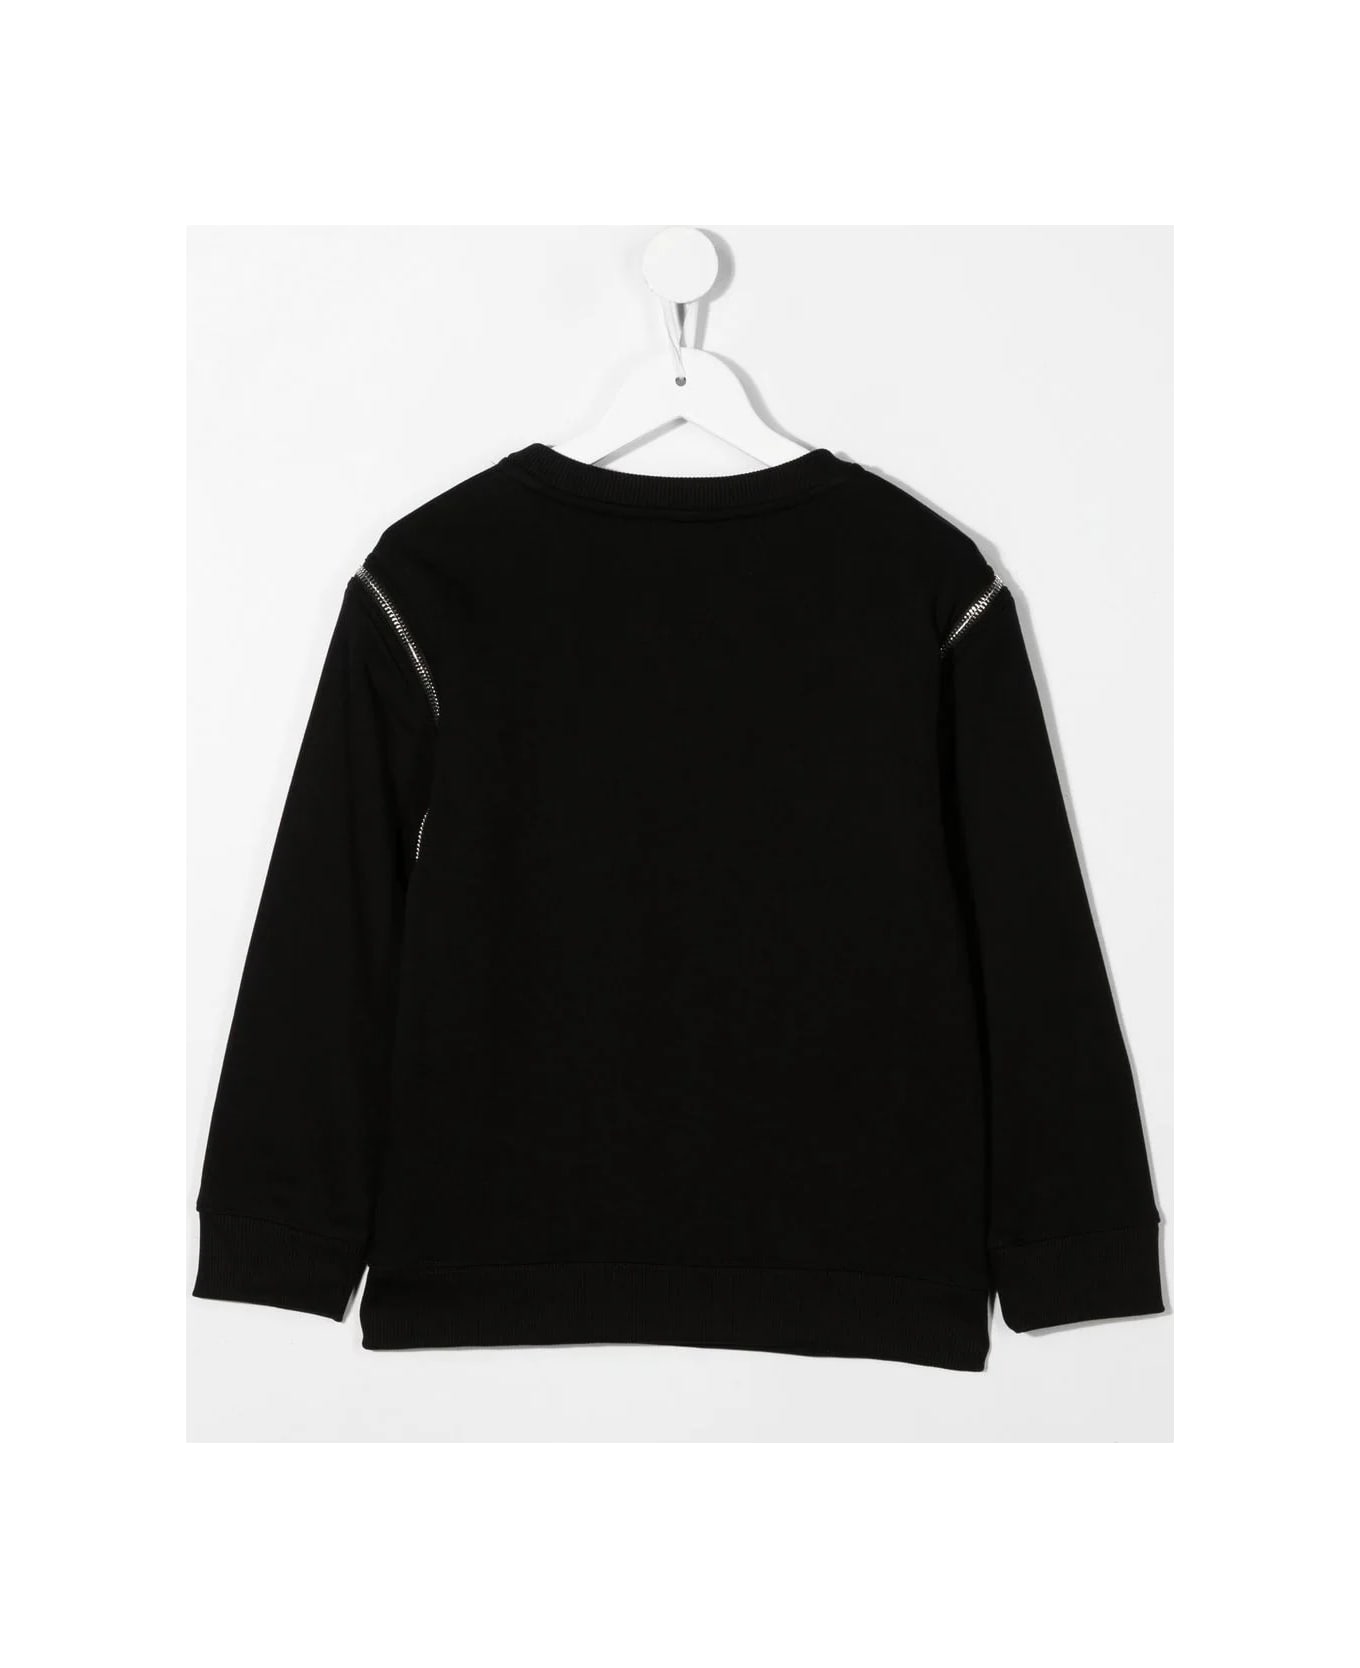 Givenchy Black Sweatshirt With Givenchy Old School Print - Nero